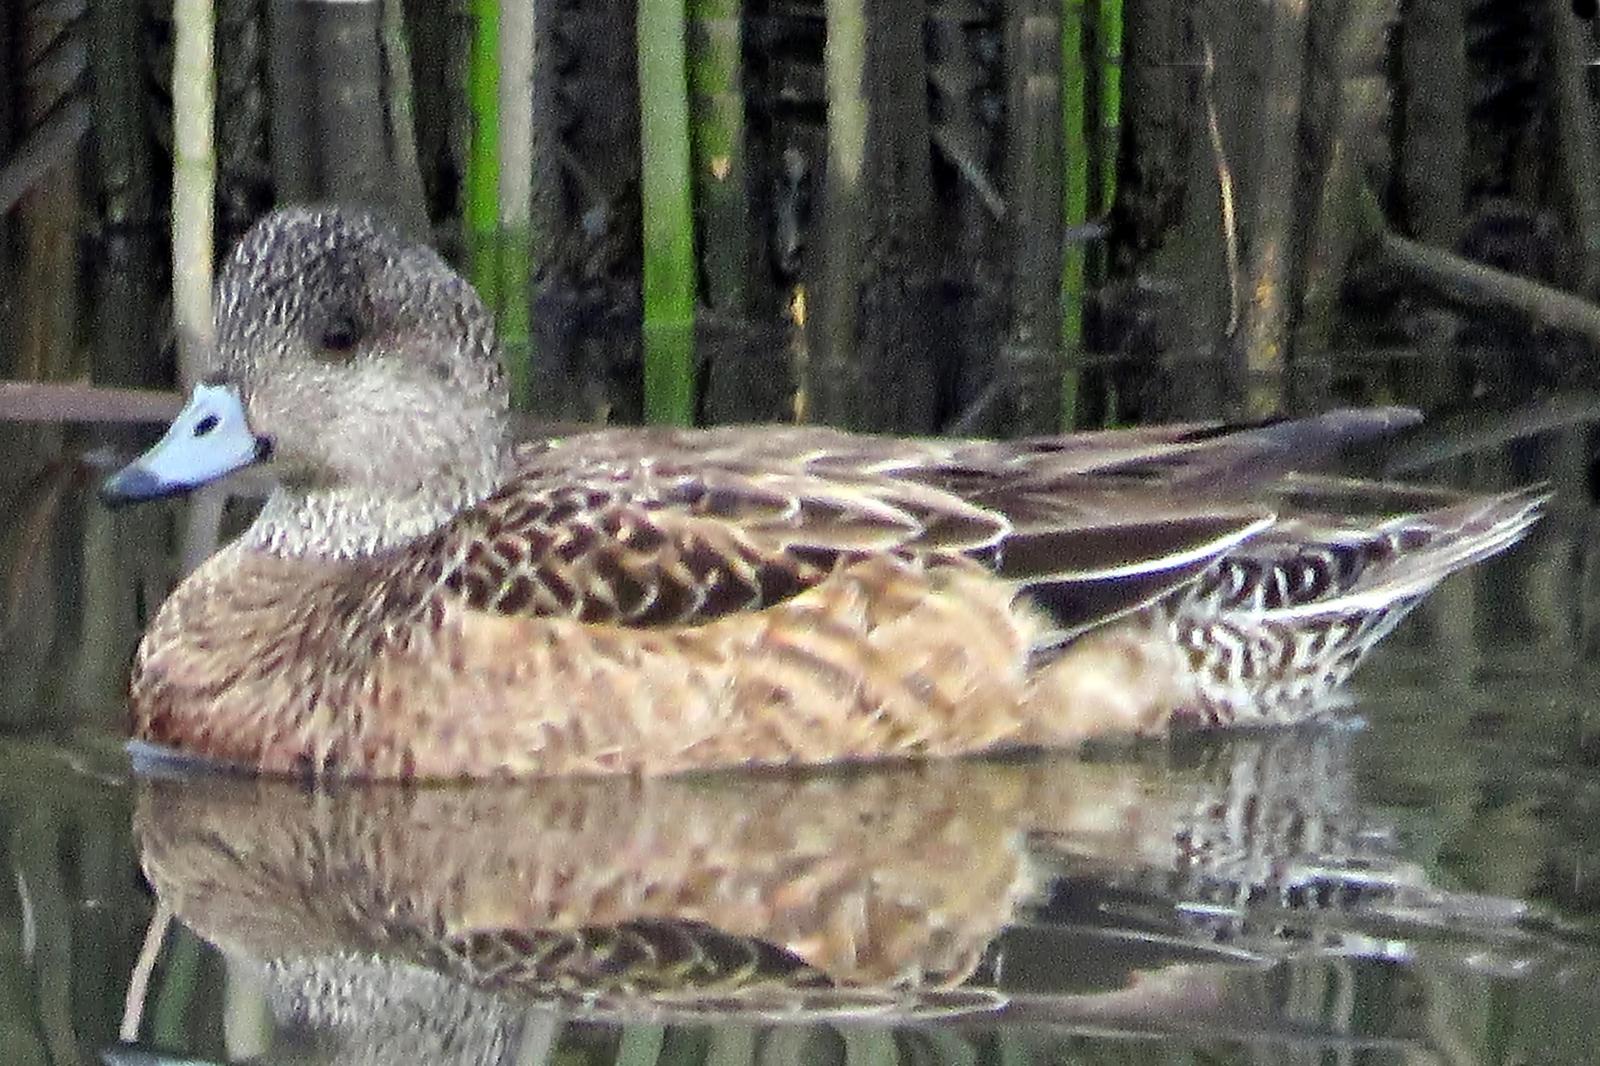 American Wigeon Photo by Bob Neugebauer